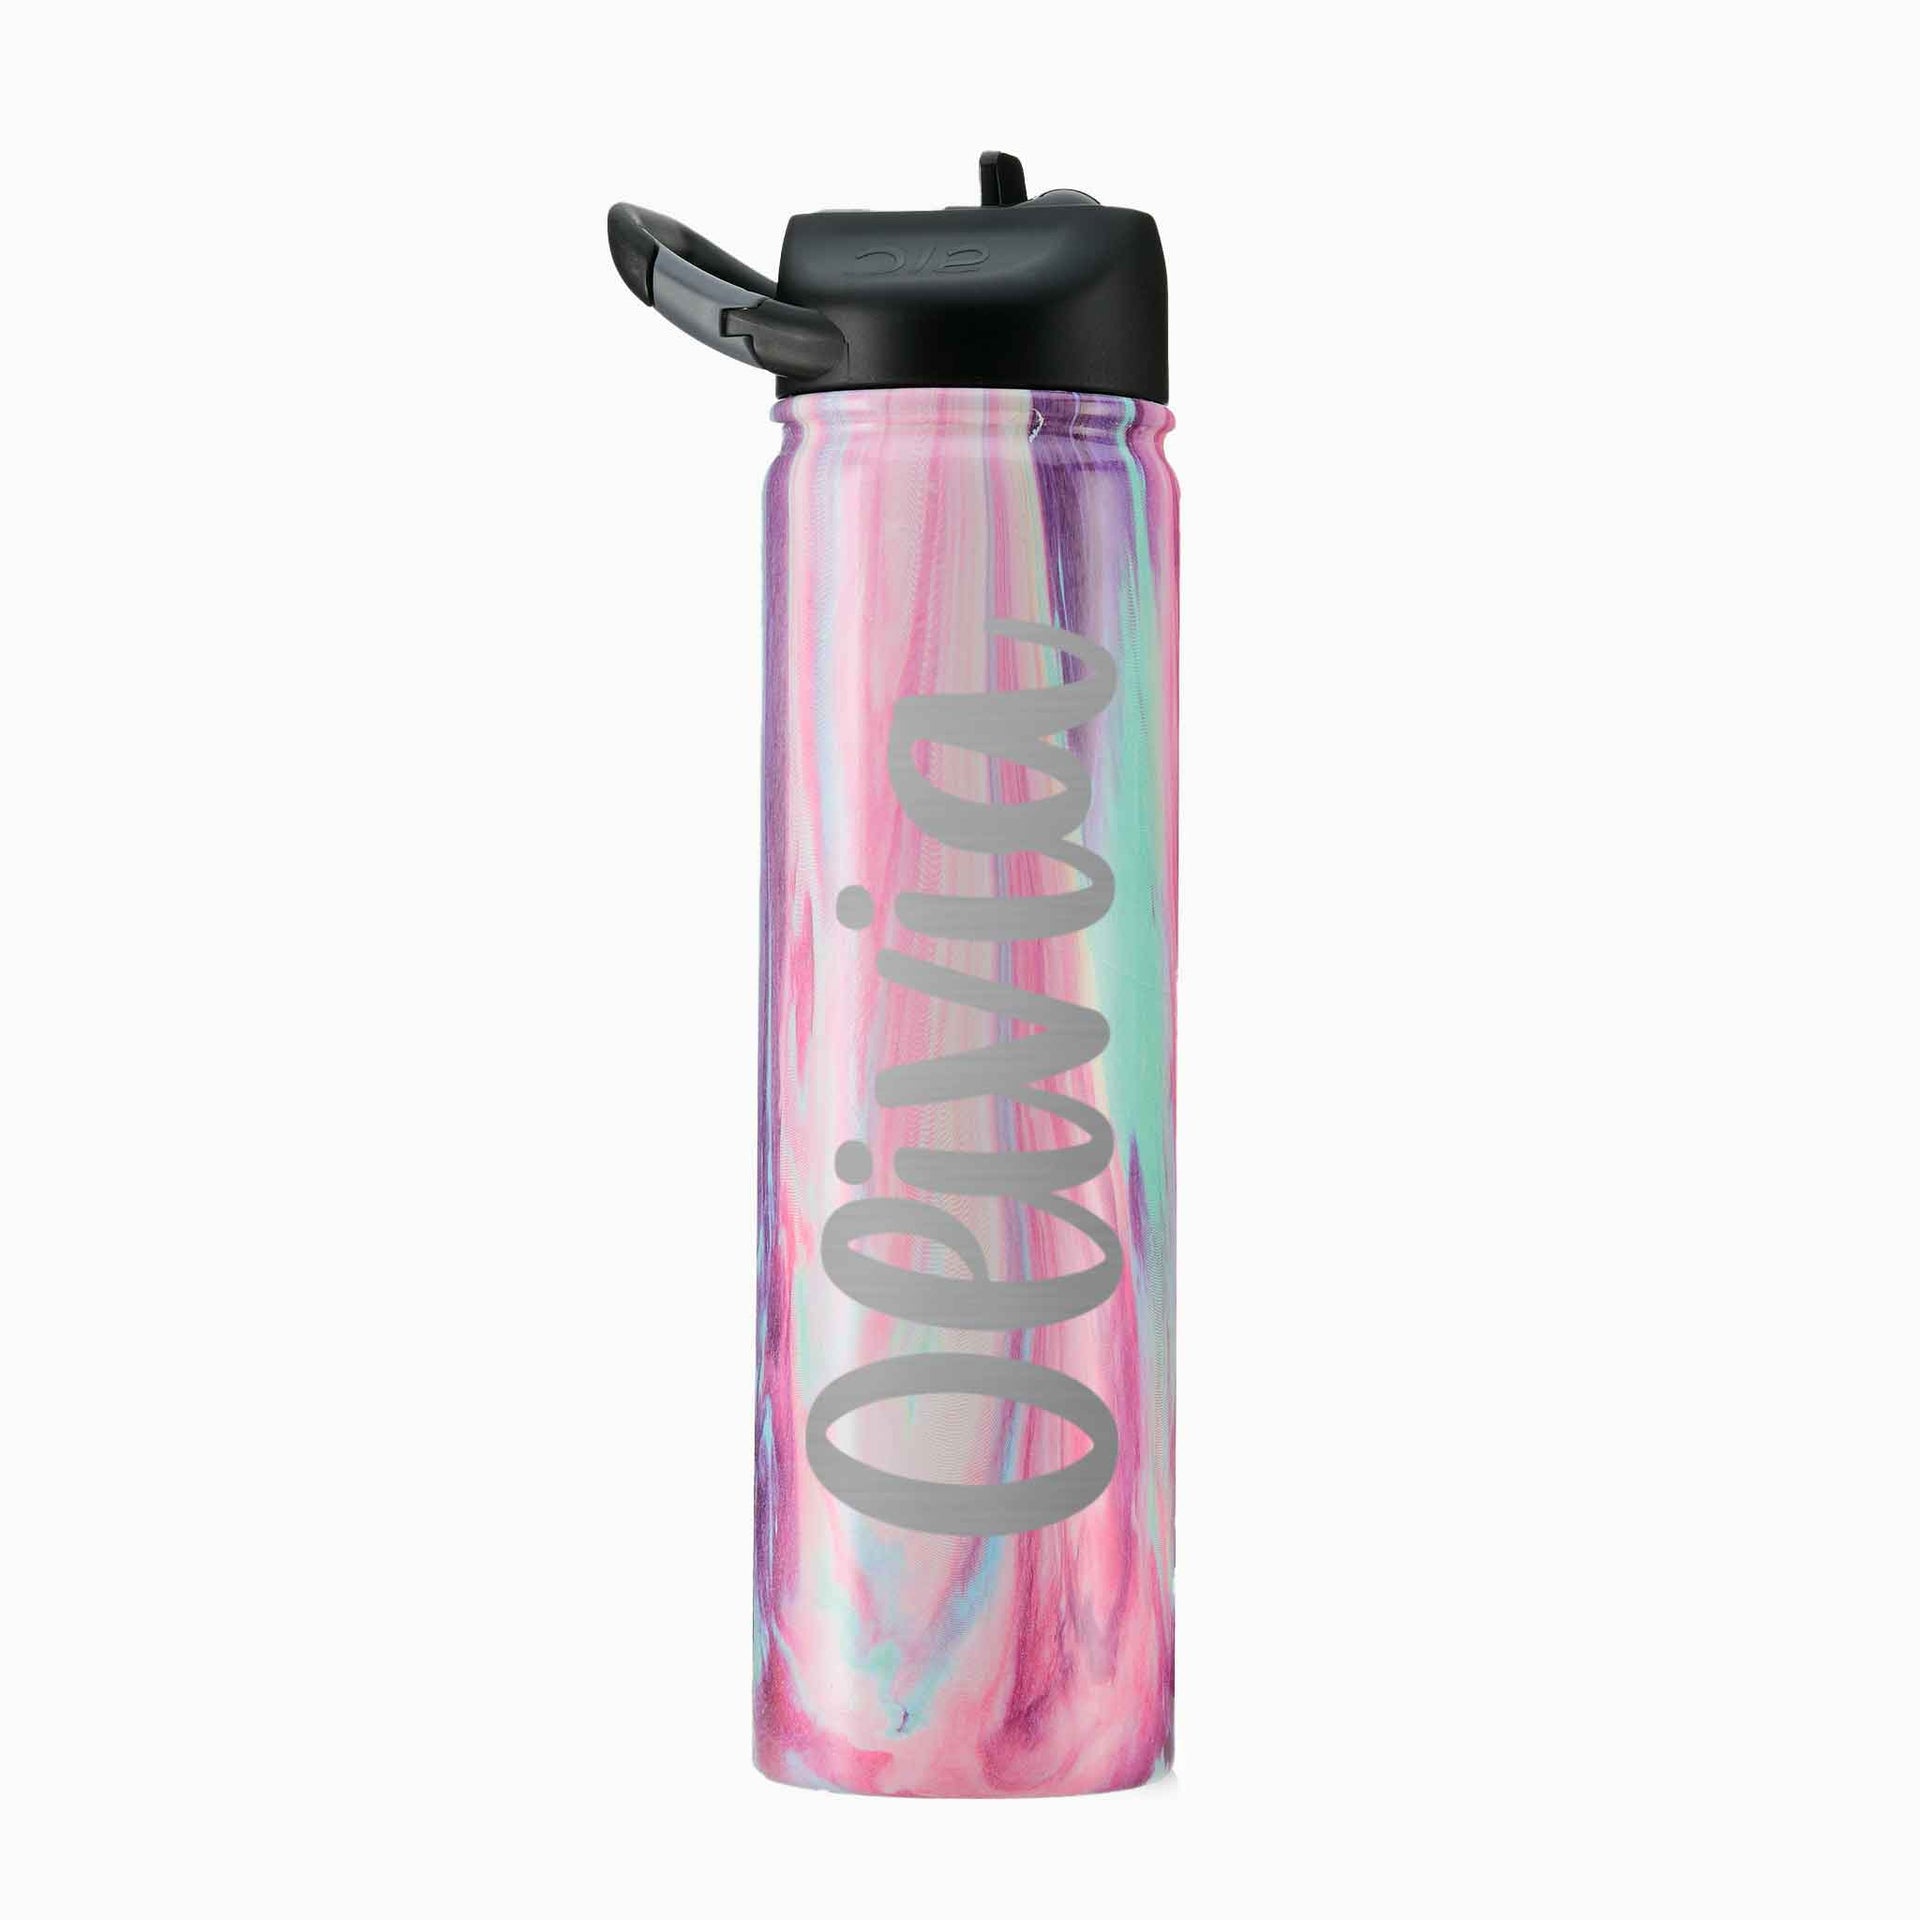 Personalized Water Bottle - Cotton Candy with Name 27 oz. - Mod Peach